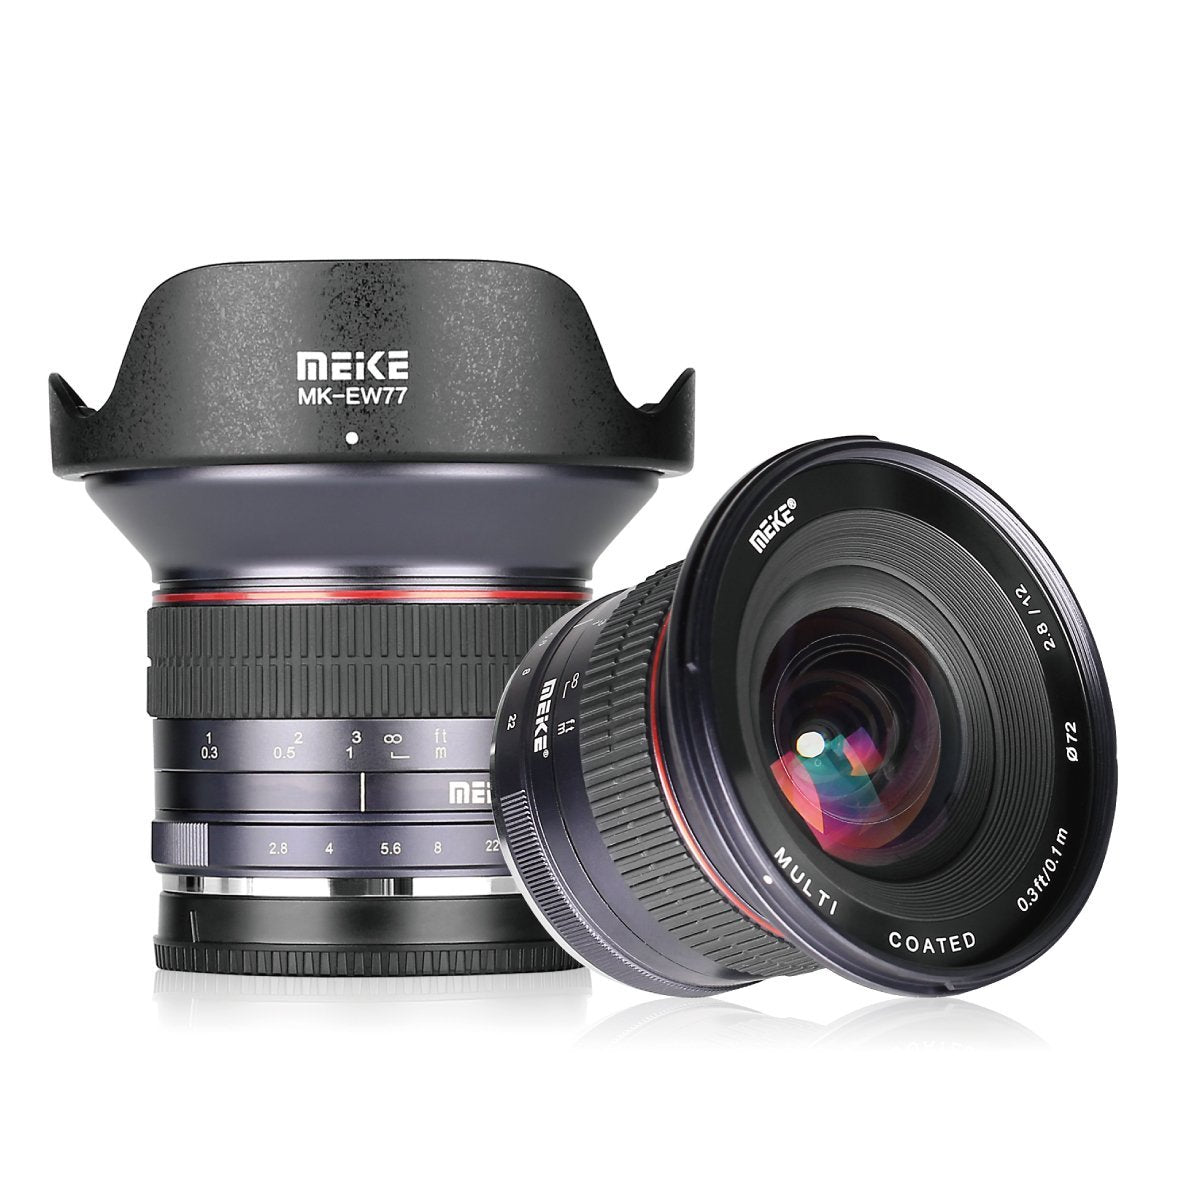 Meike MK-12mm 12mm f/2.8 Ultra Wide Angle Fixed Lens for Fujifilm Mirrorless Camera with APS-C